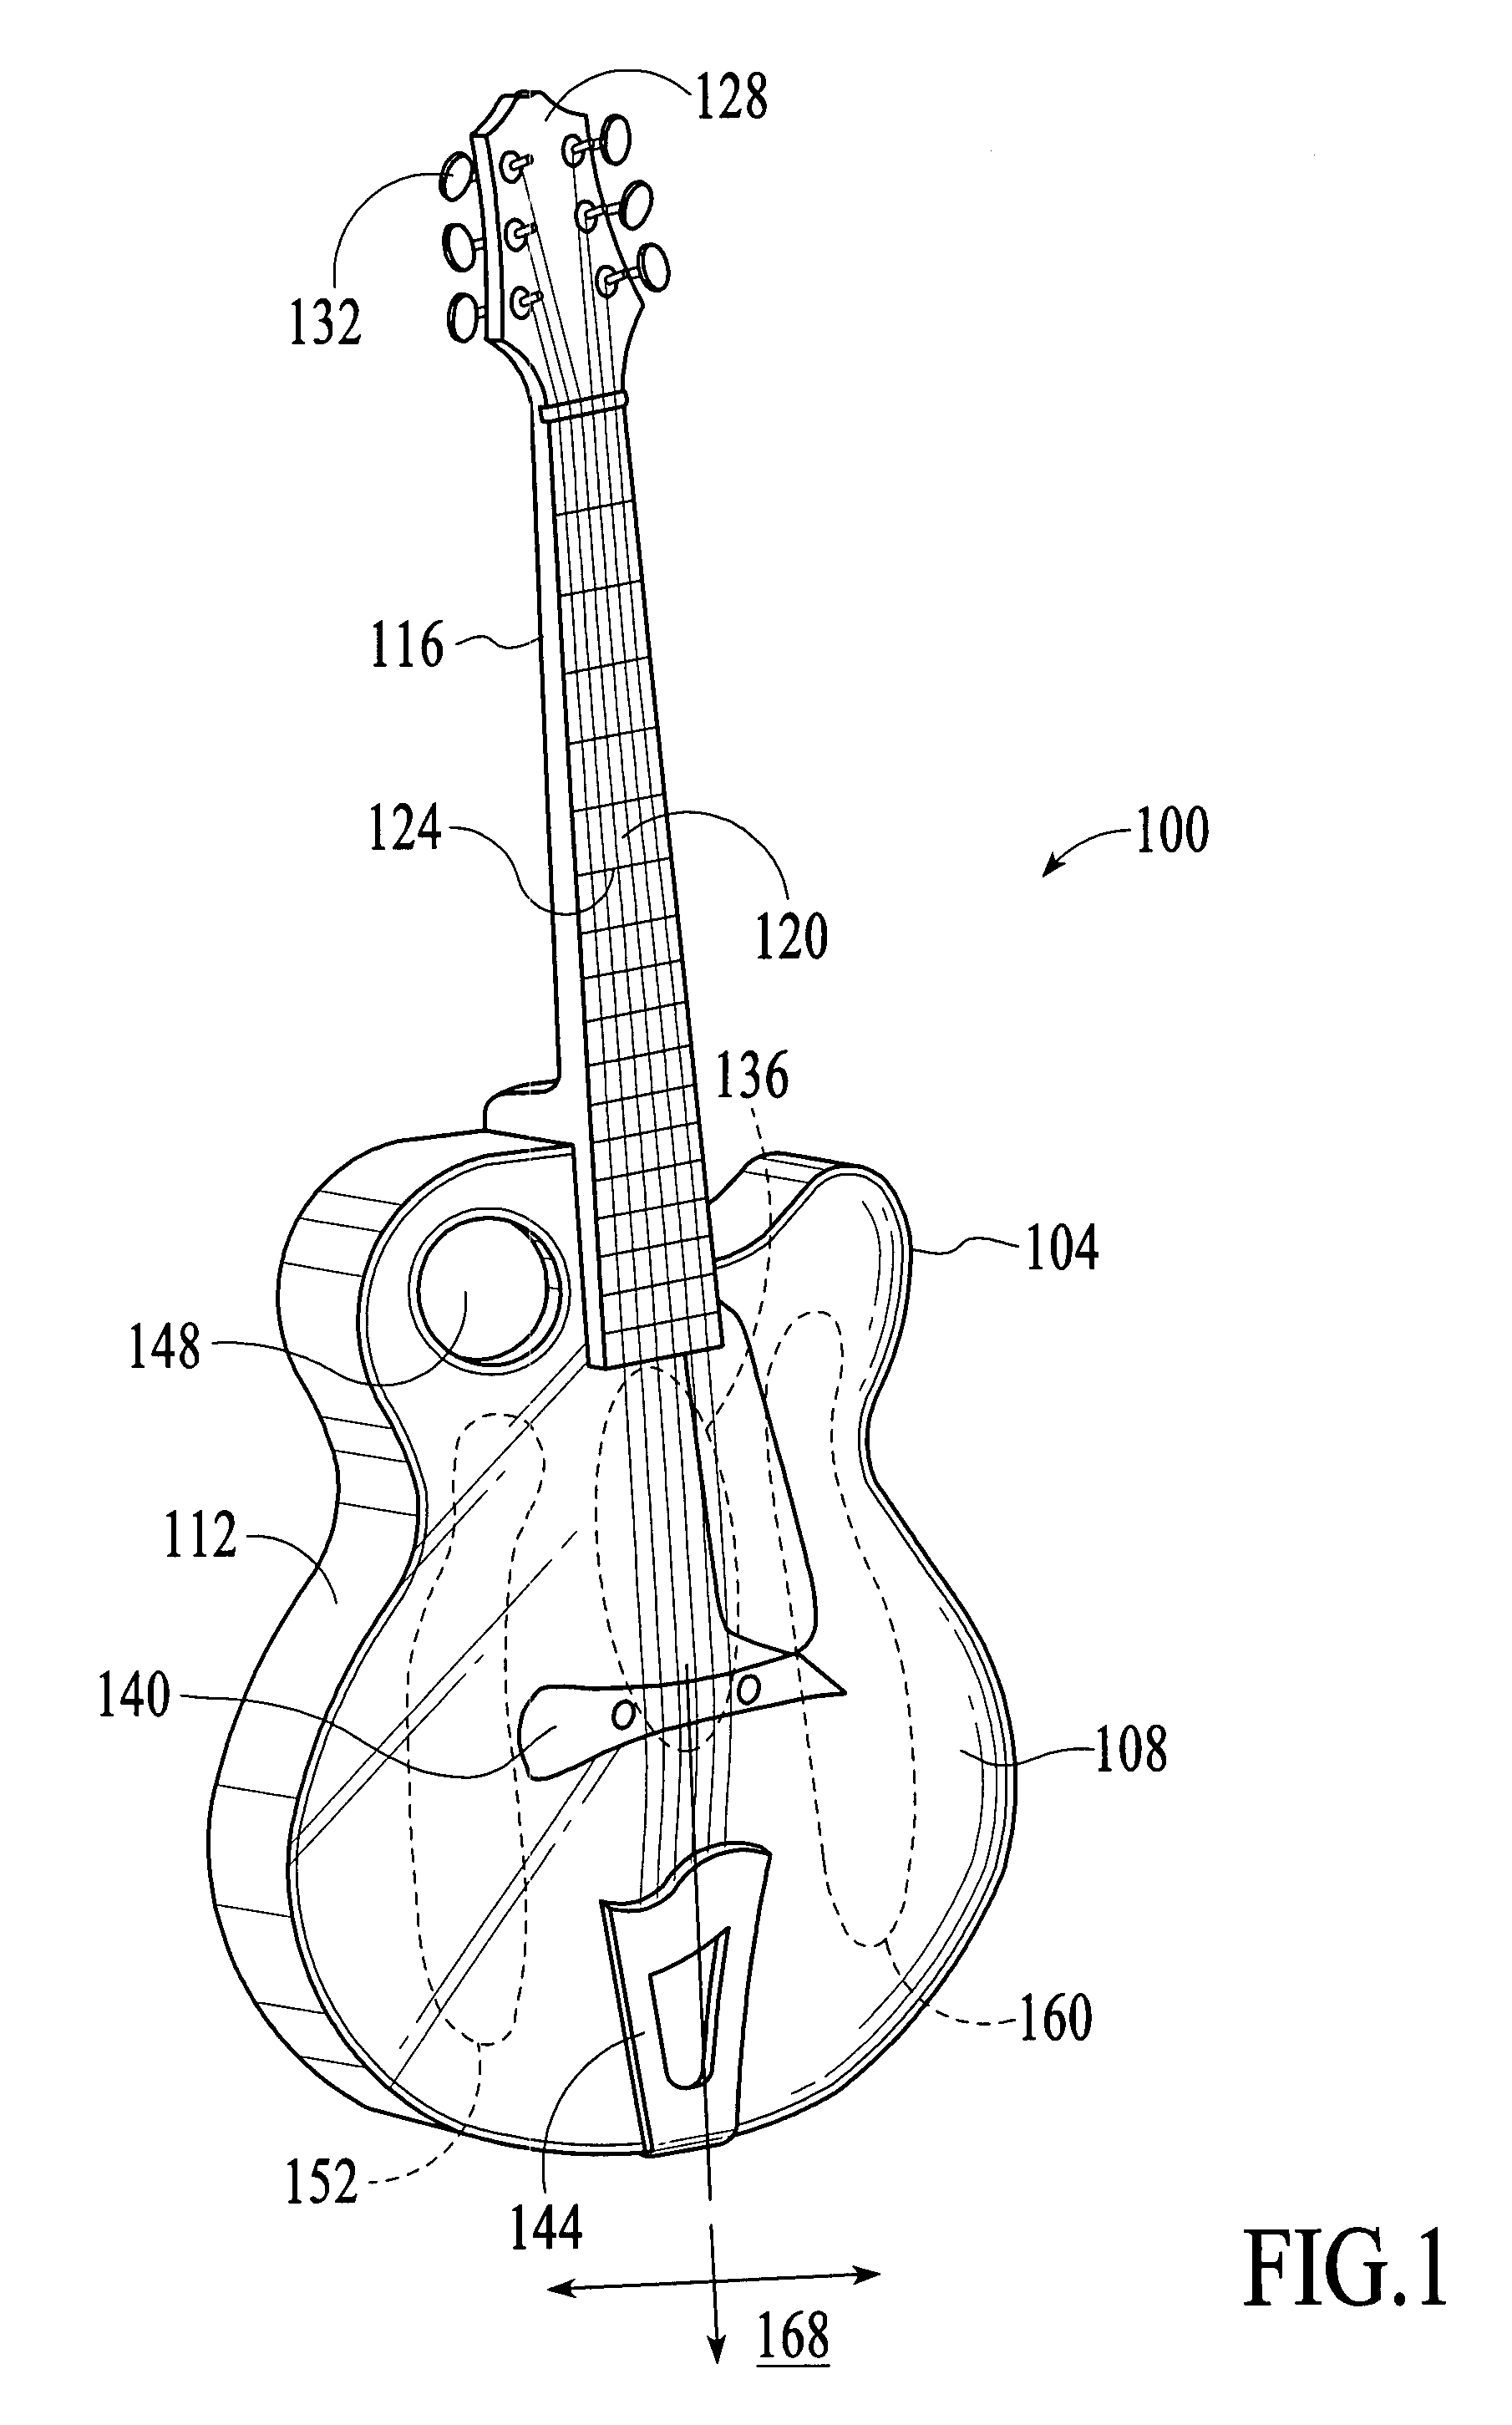 Stringed musical instrument having a hybrid arch-top and flat-top soundboard